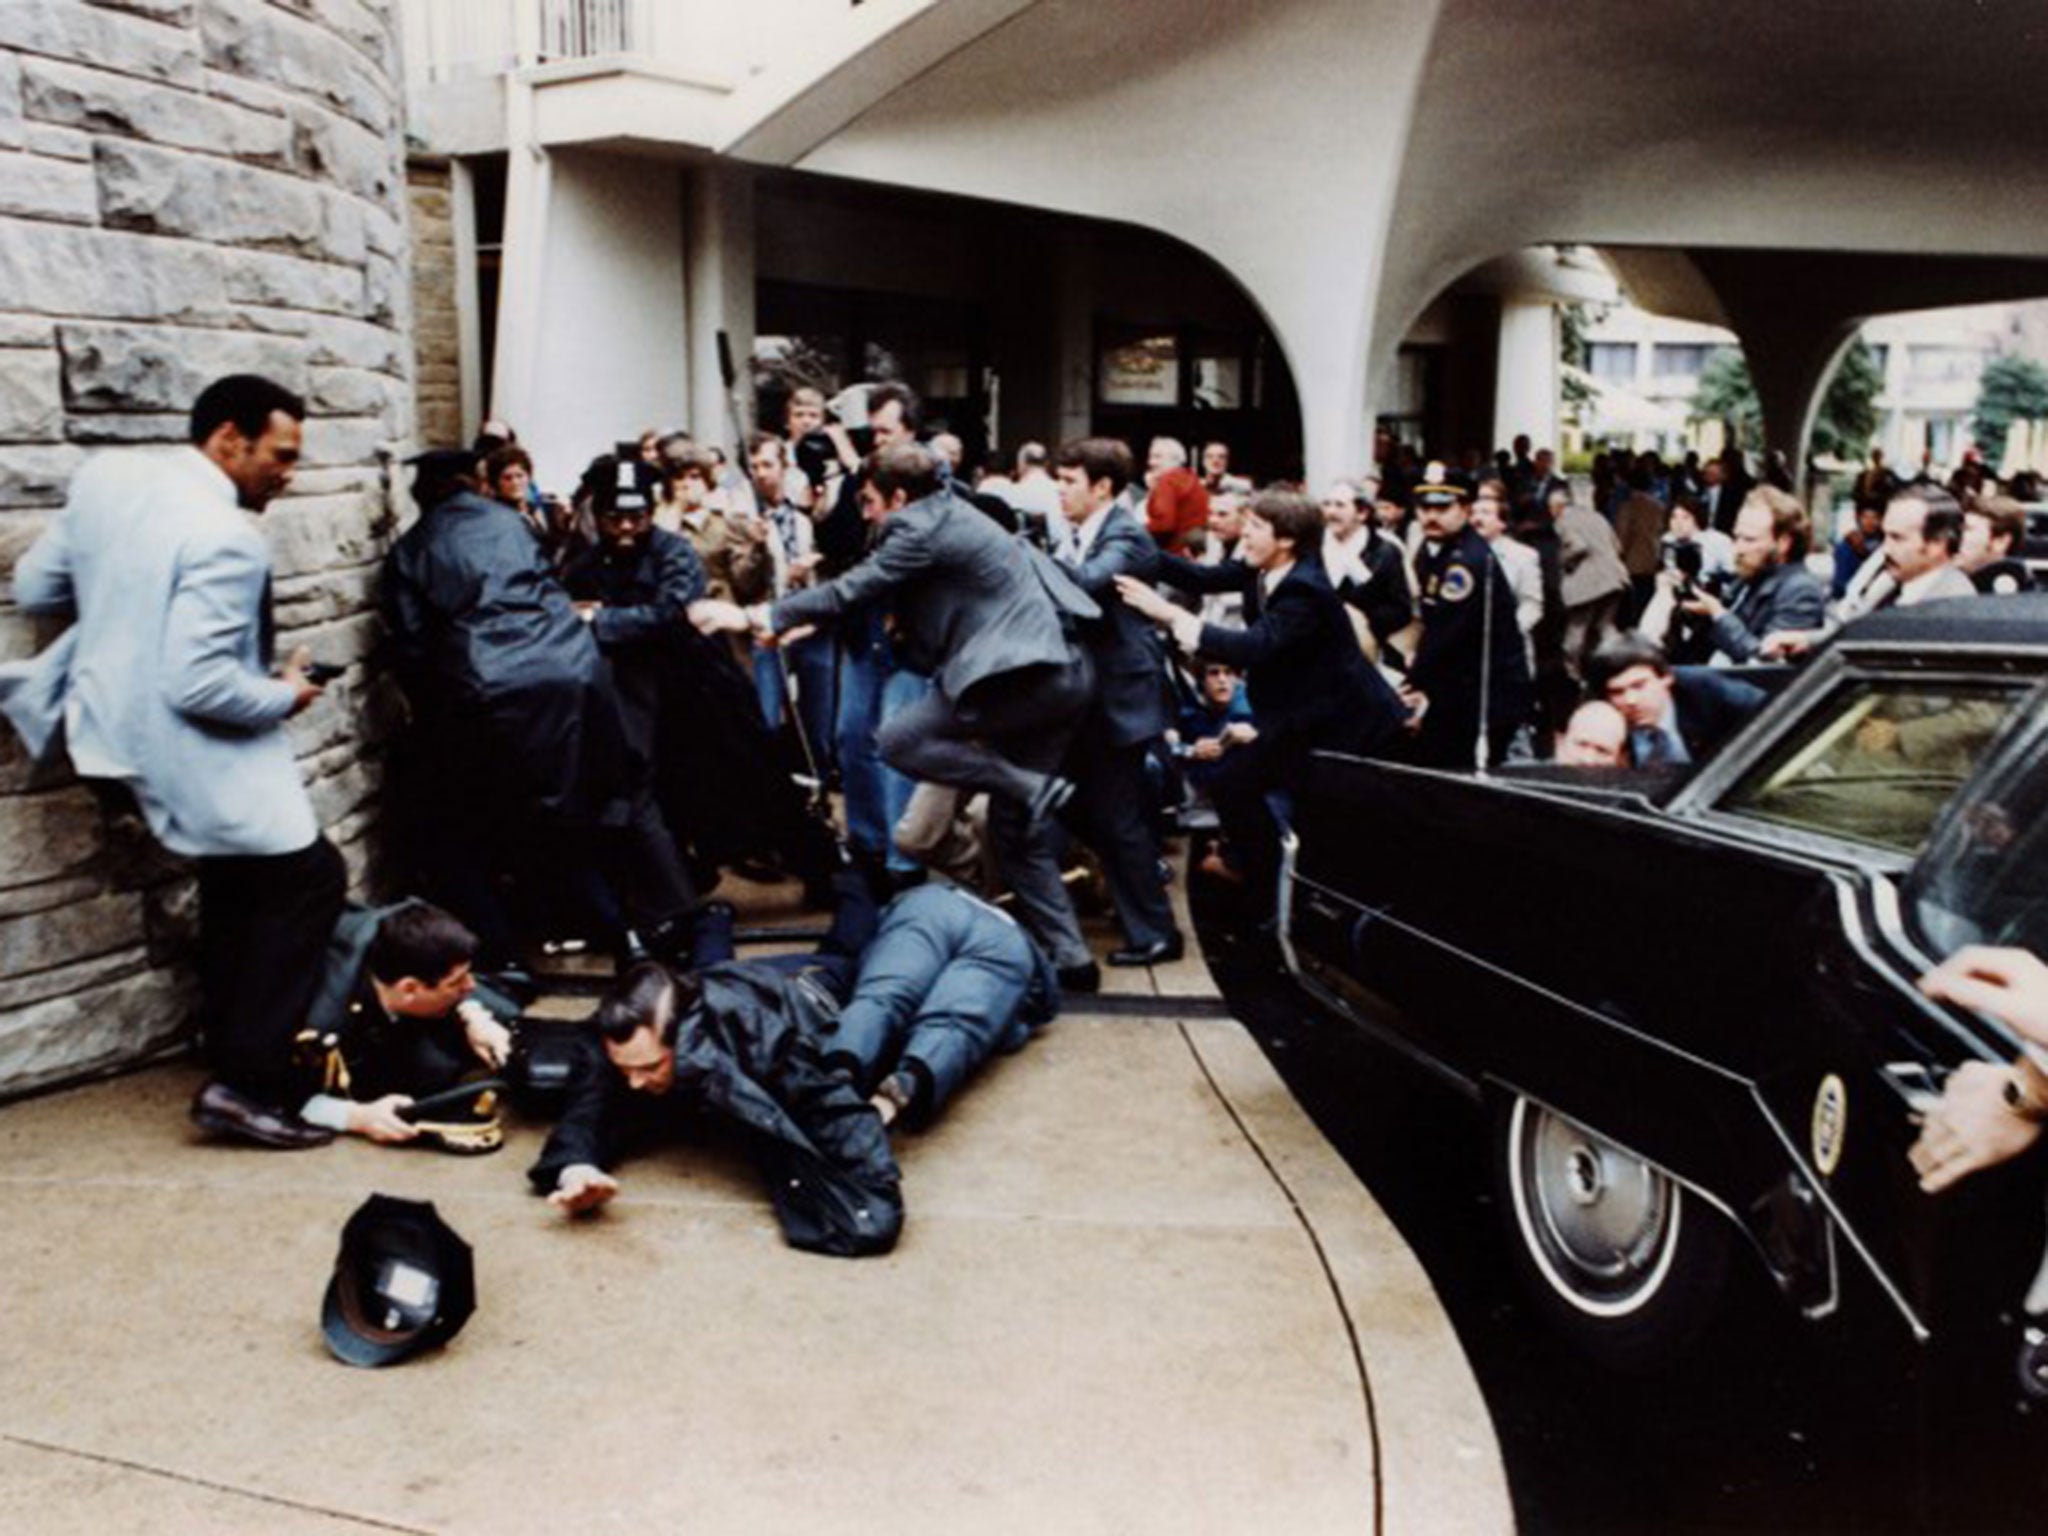 Secret service officer Tim McCarthy was shot after throwing himself in front of Ronald Reagan to protect him in 1981